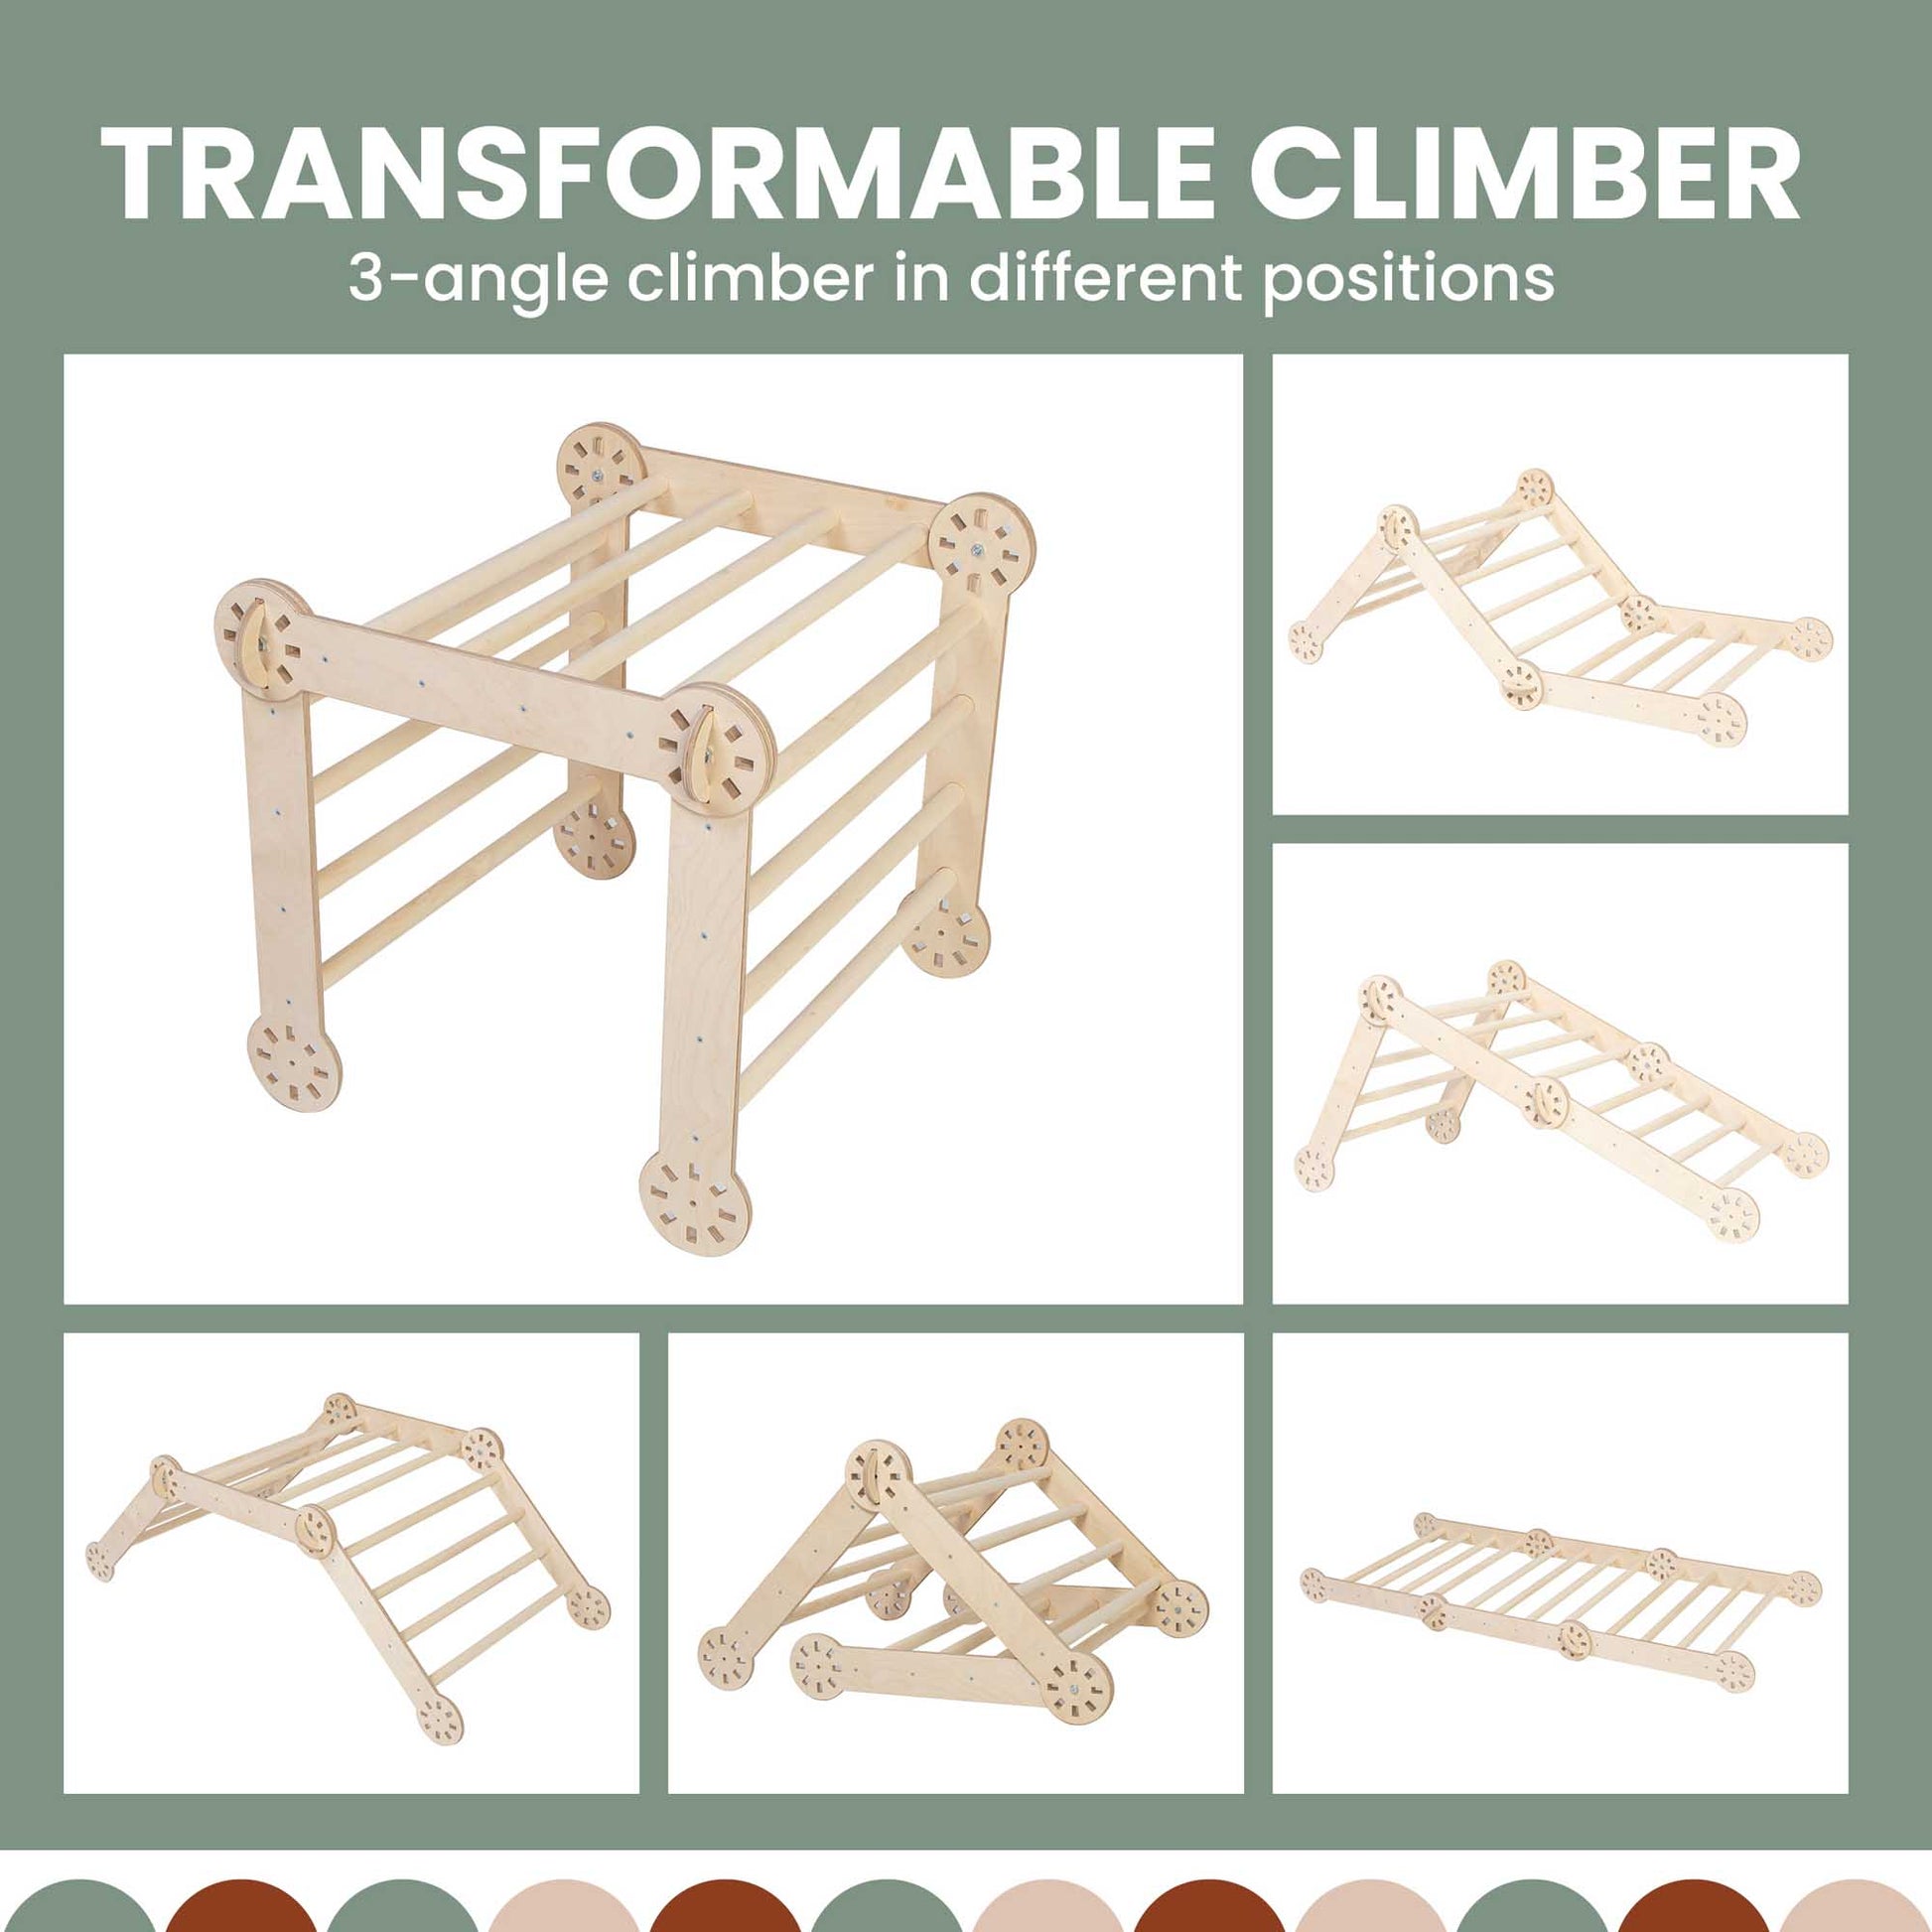 A set of Climbing triangle + Transformable climbing gym + a ramp, featuring a foldable climbing toy and an indoor gym.